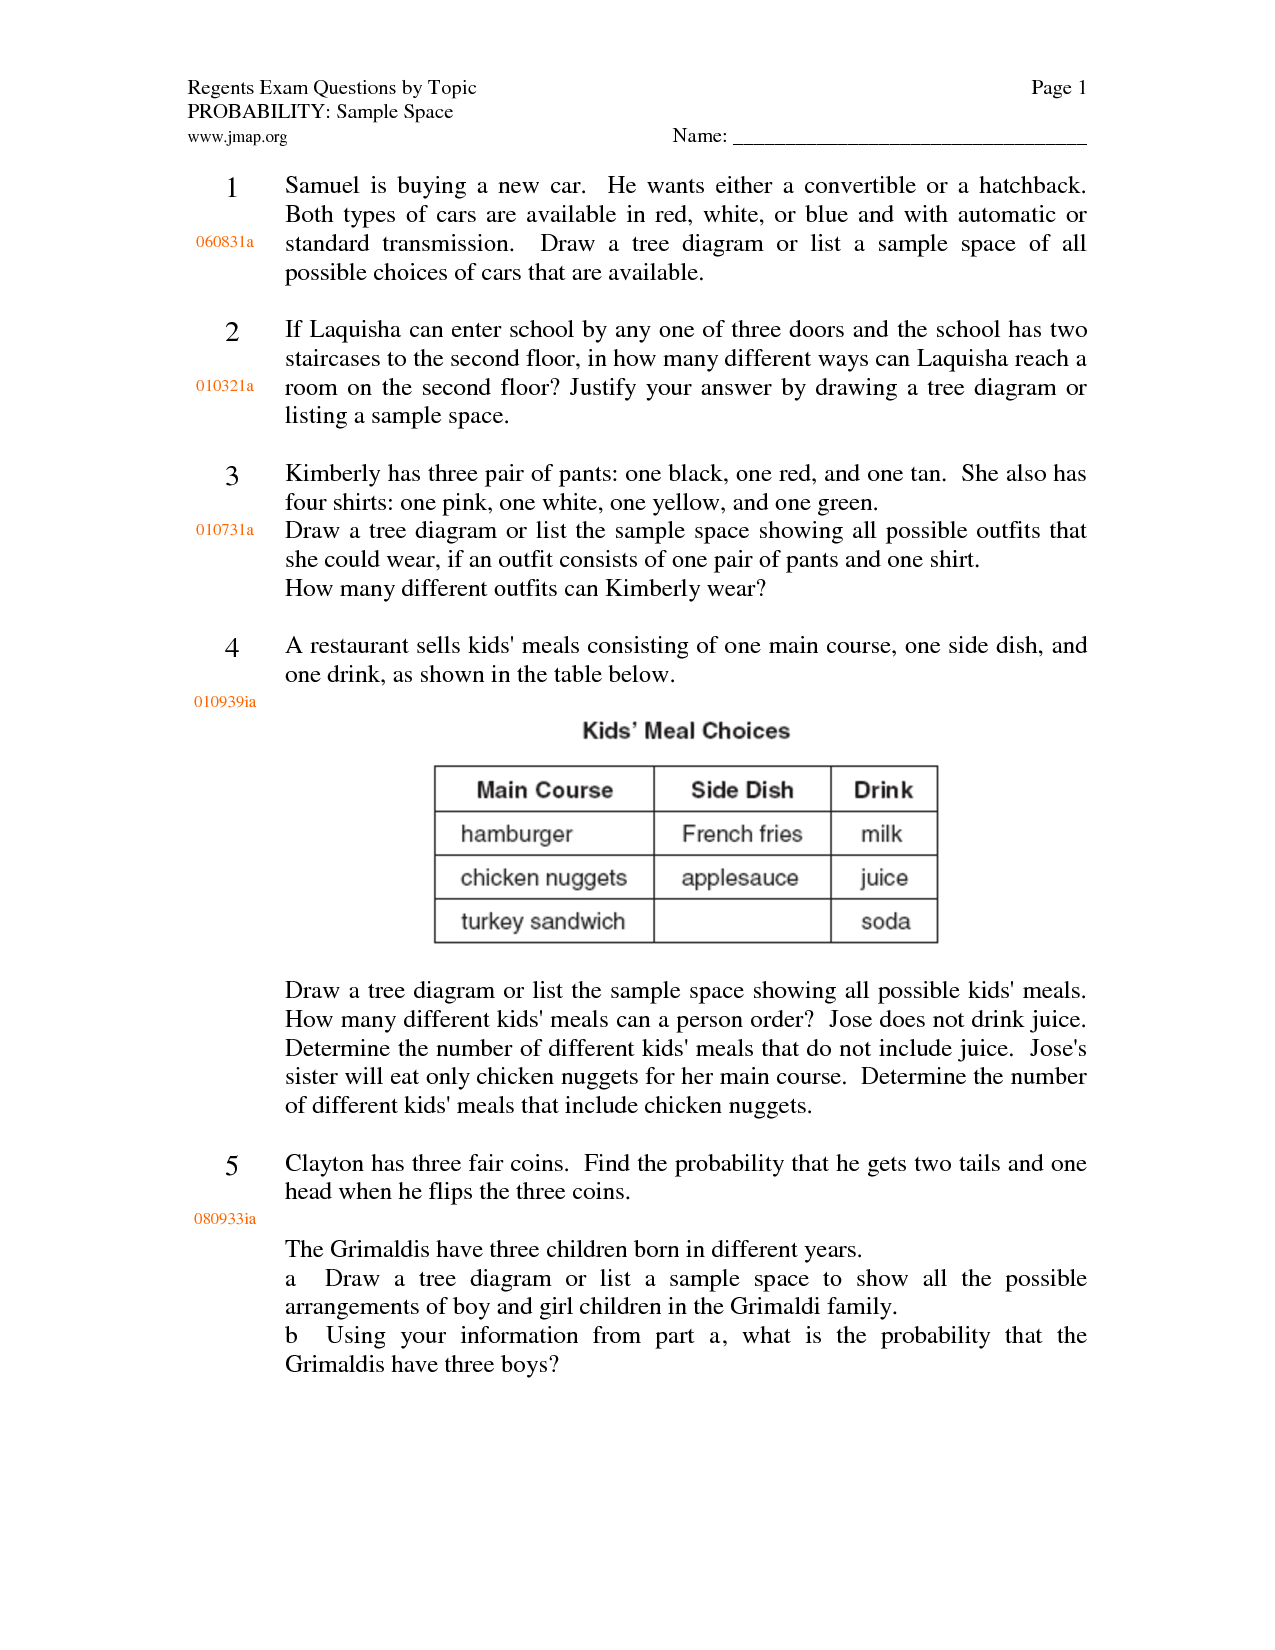 Probability Sample Space Worksheets Image